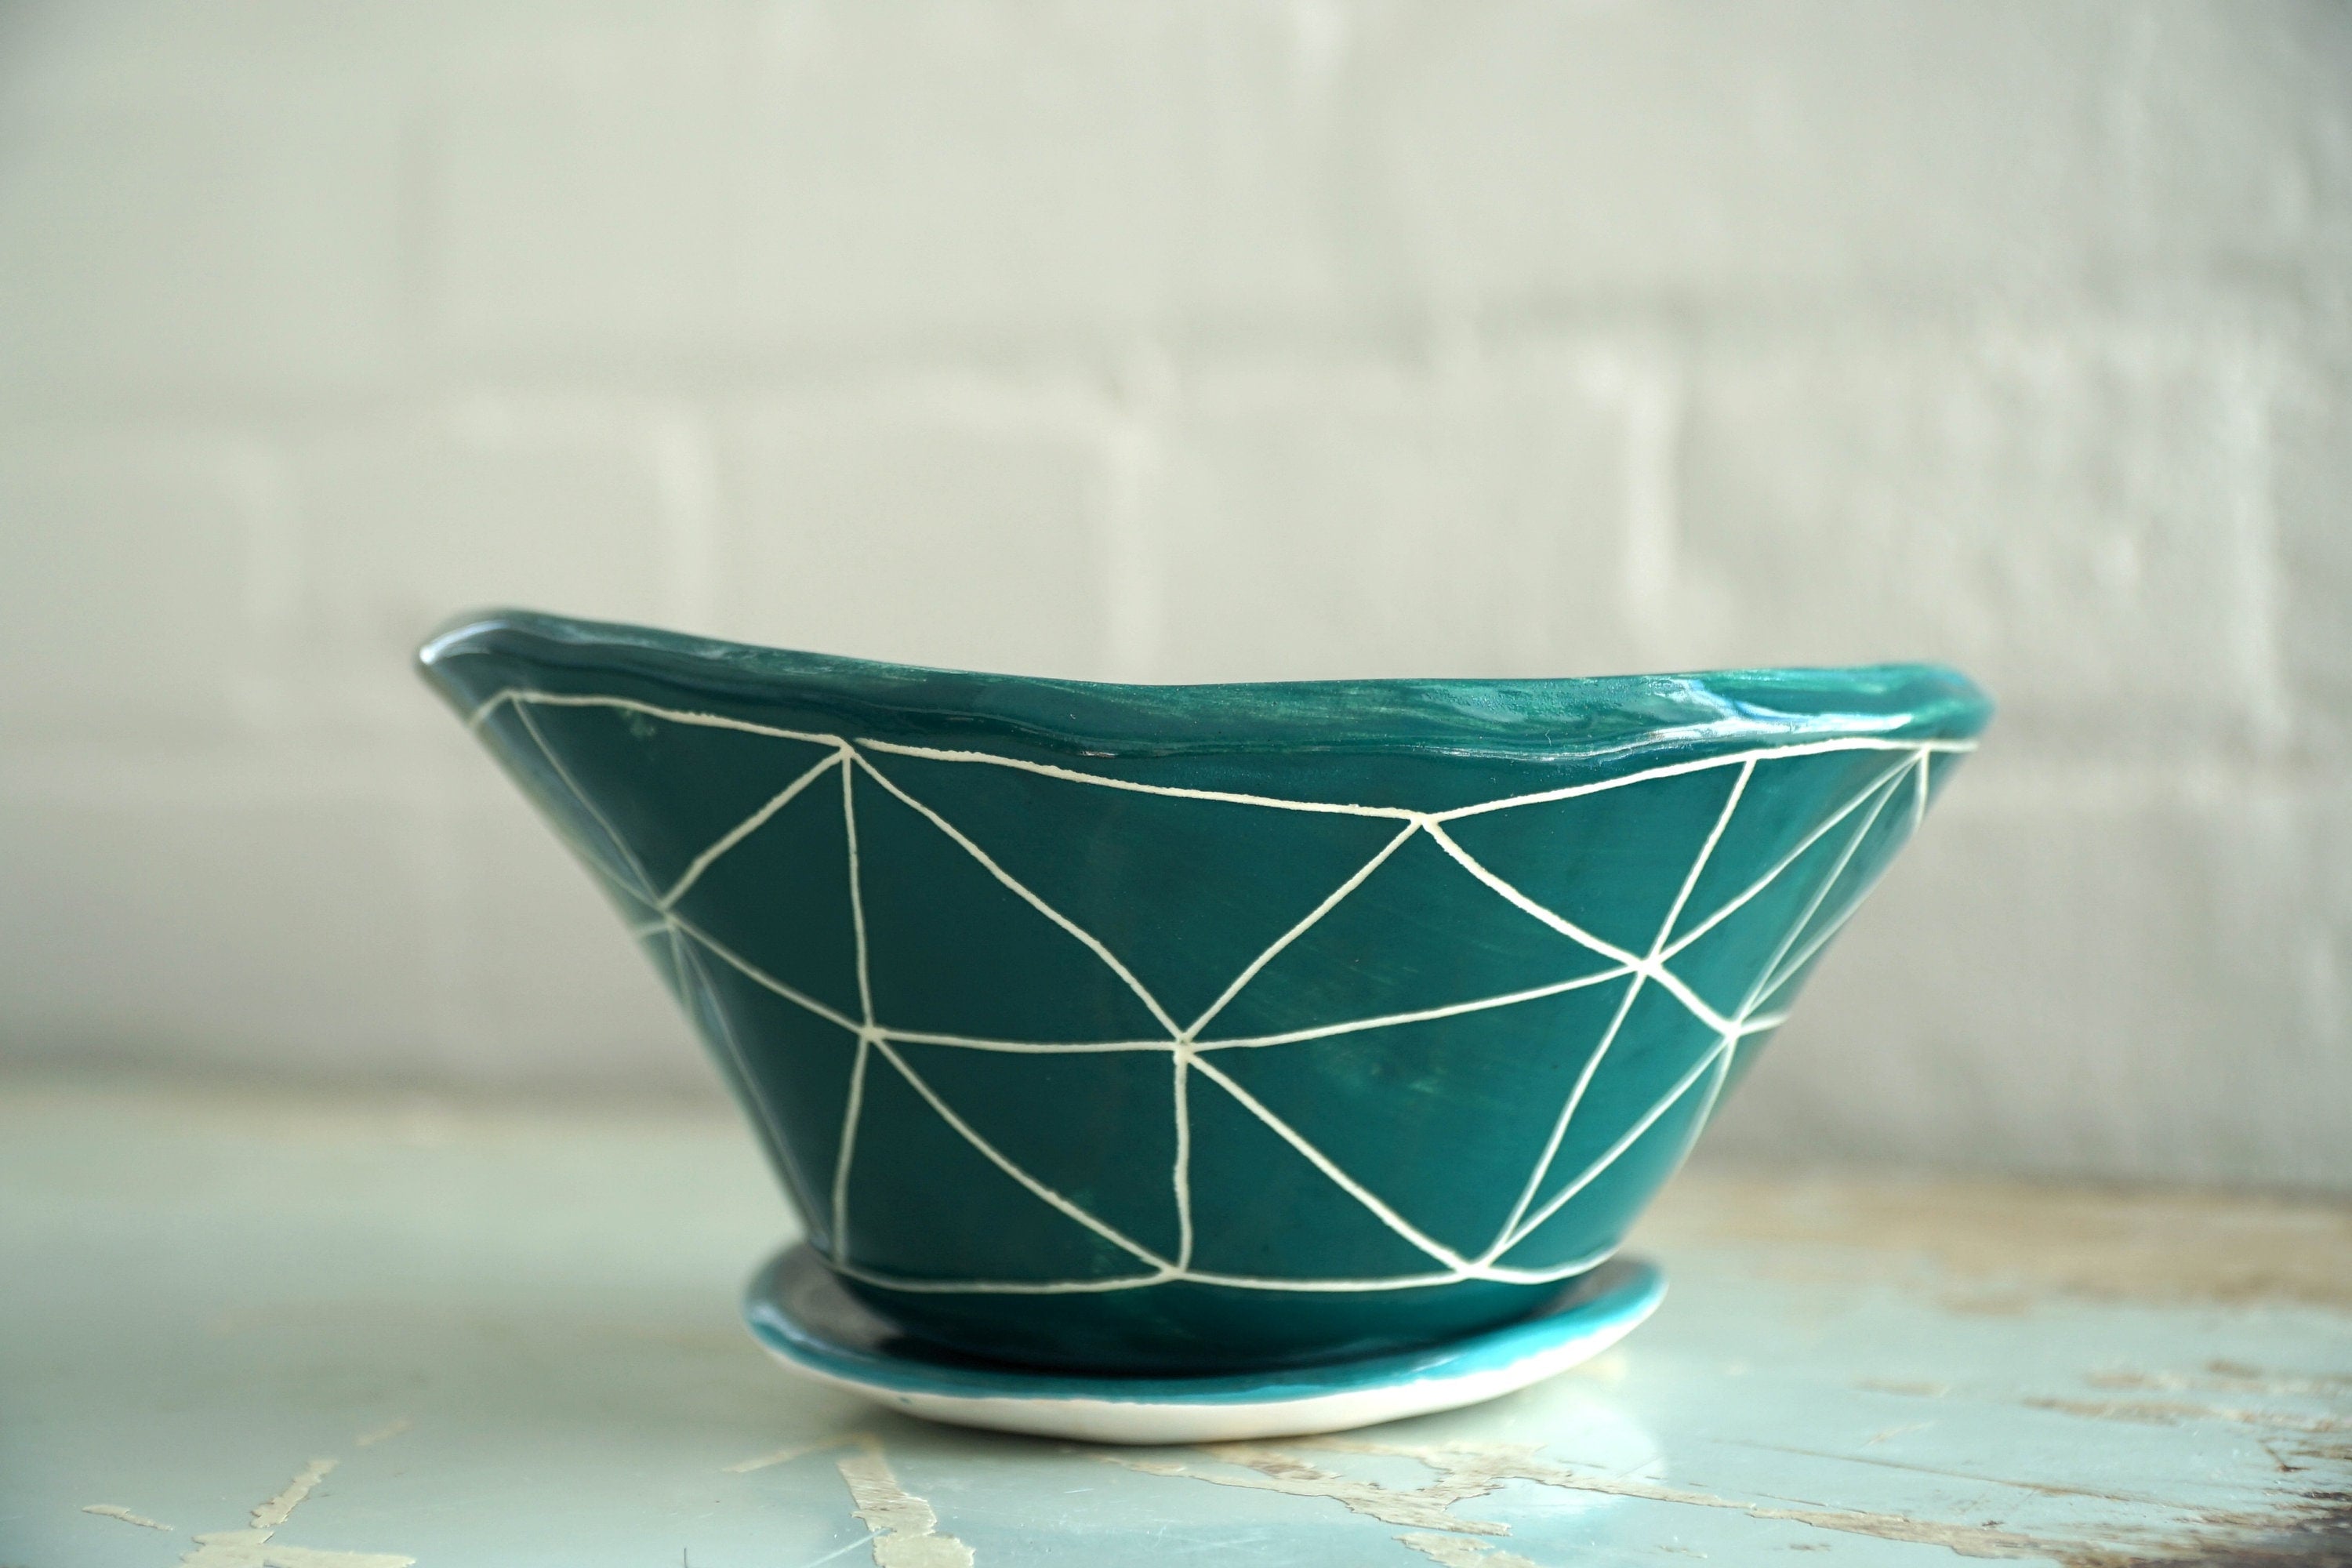 Teal & White Glazed Table Planter w/ “GeoTriangle" Design - Matching Tray - Succulent Planter - Indoor Planter - Etc